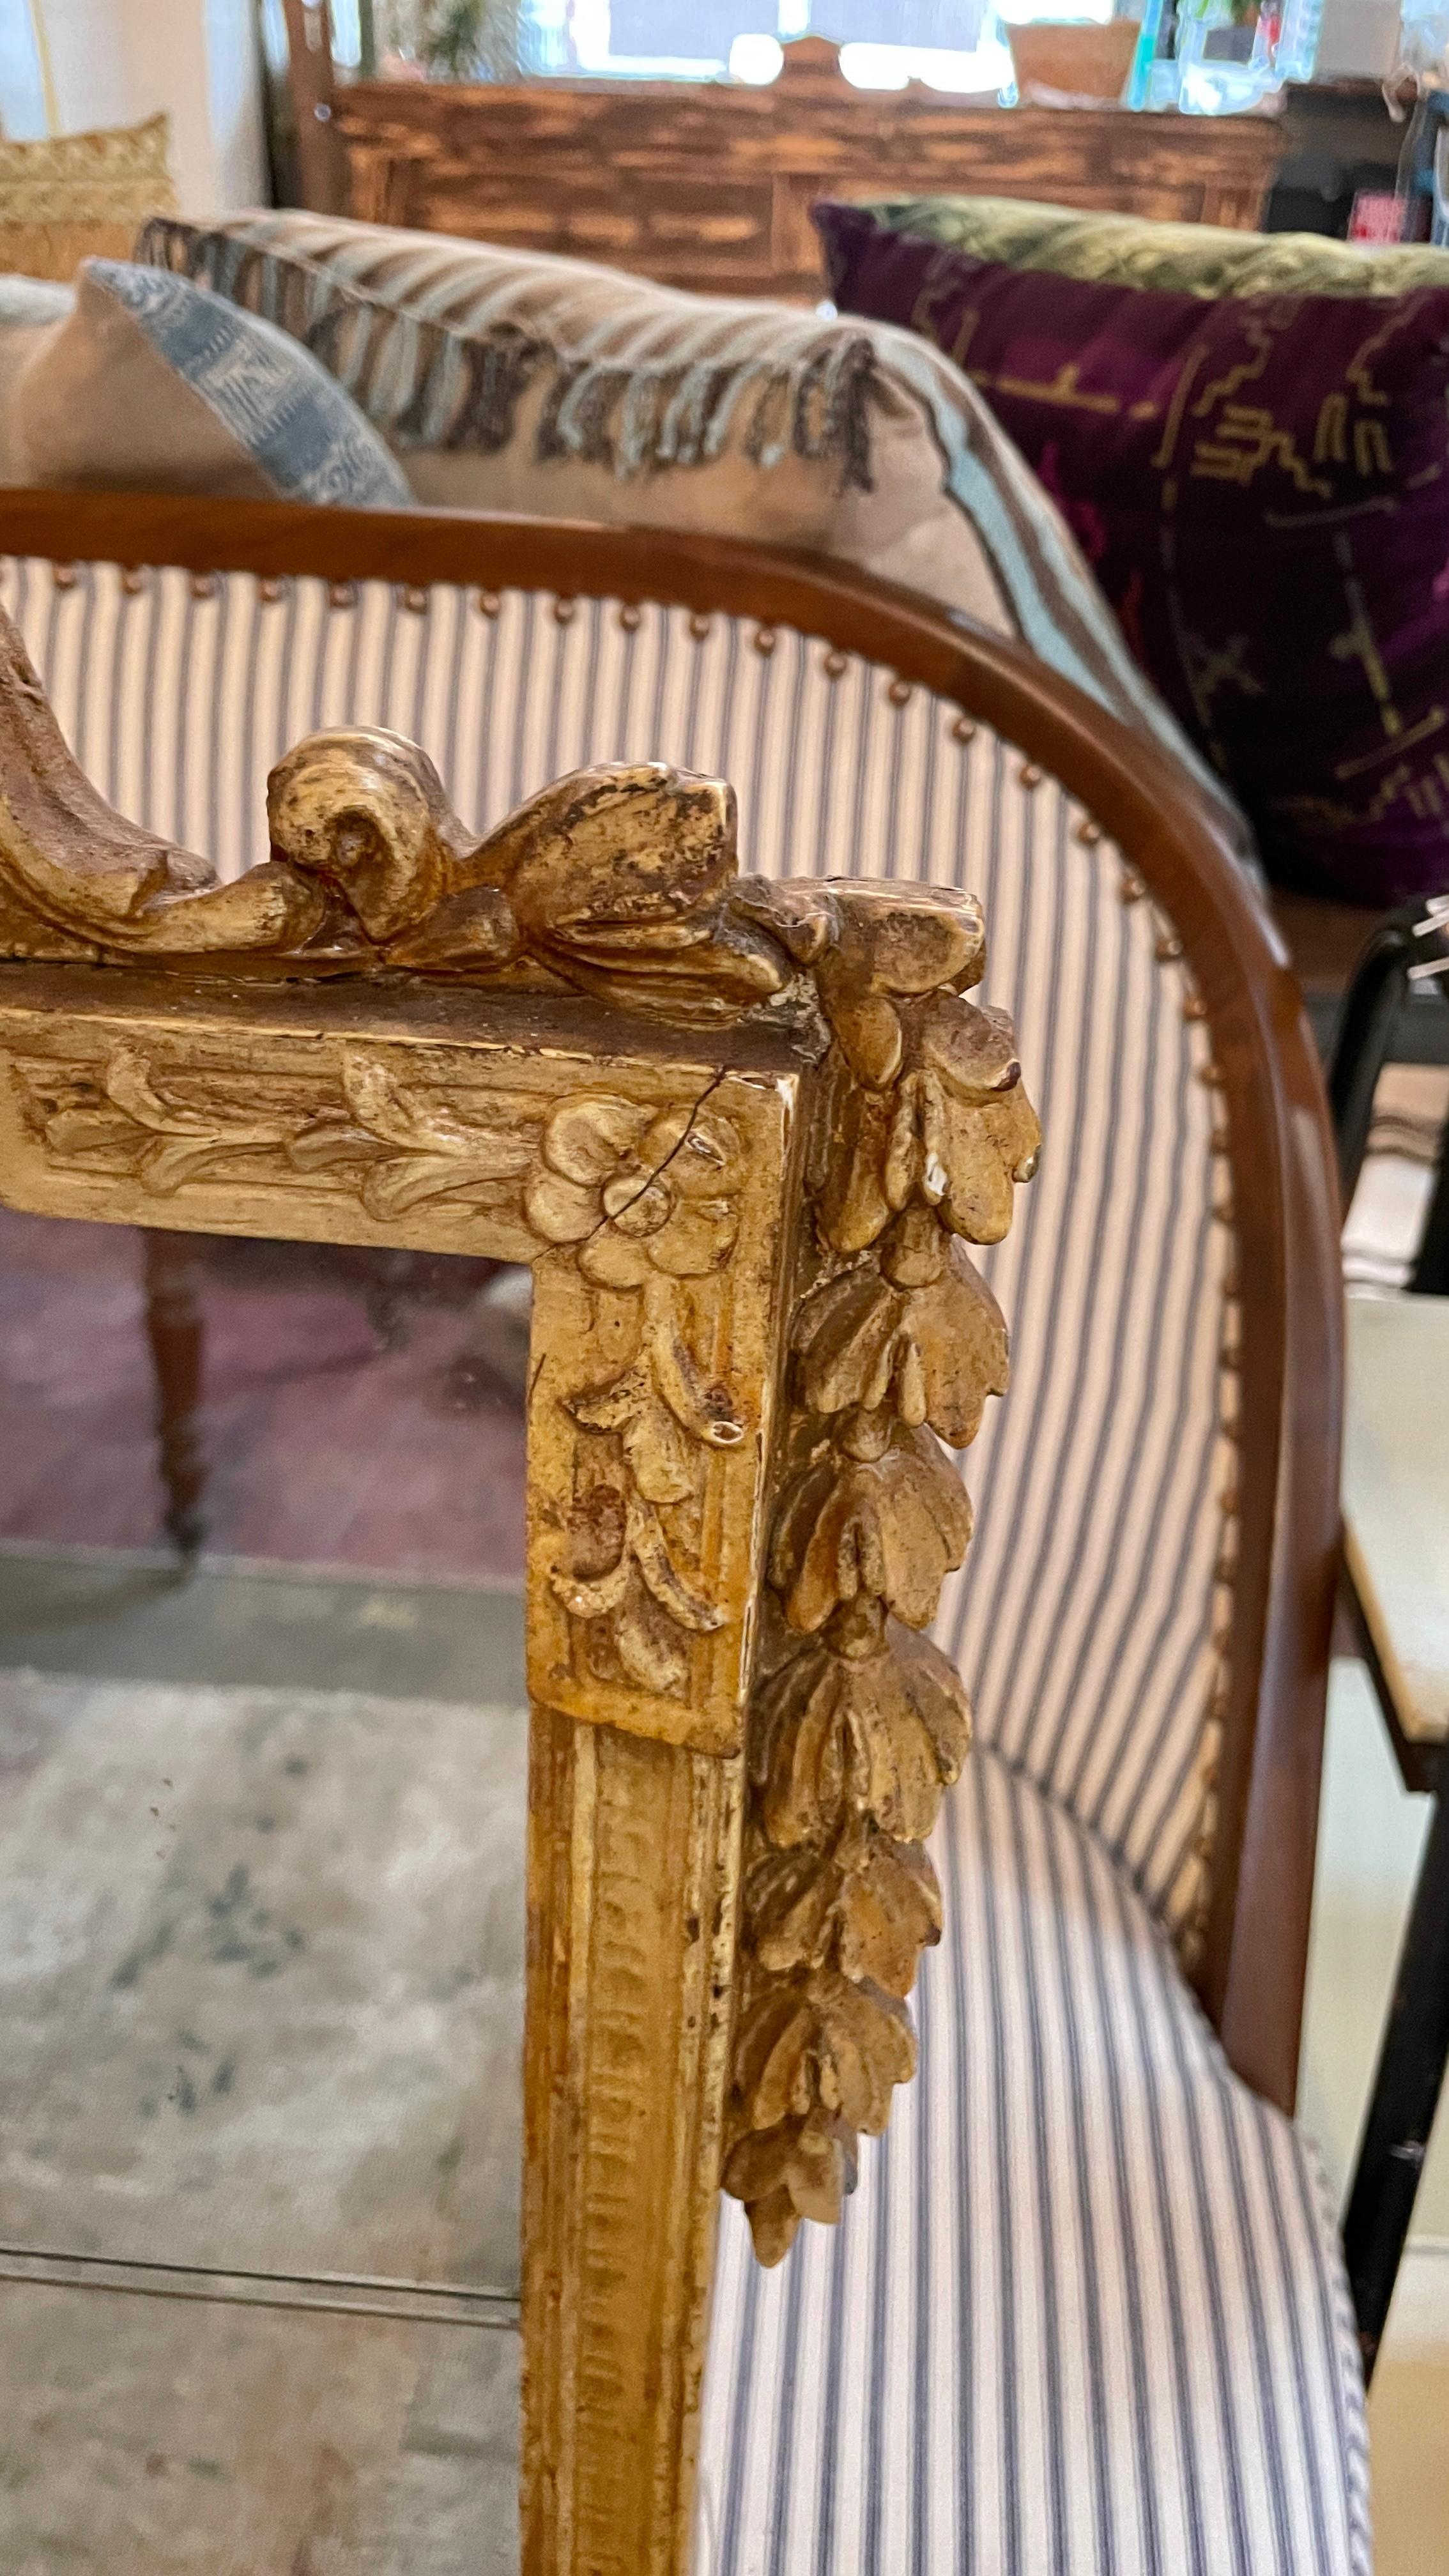 This beautiful antique ochre color painted large wall mirror is in great condition. The frame is painted with a beautiful warm golden yellow color around the ornate hand carved frame. Floral designs carved into the frame give this mirror an elegant